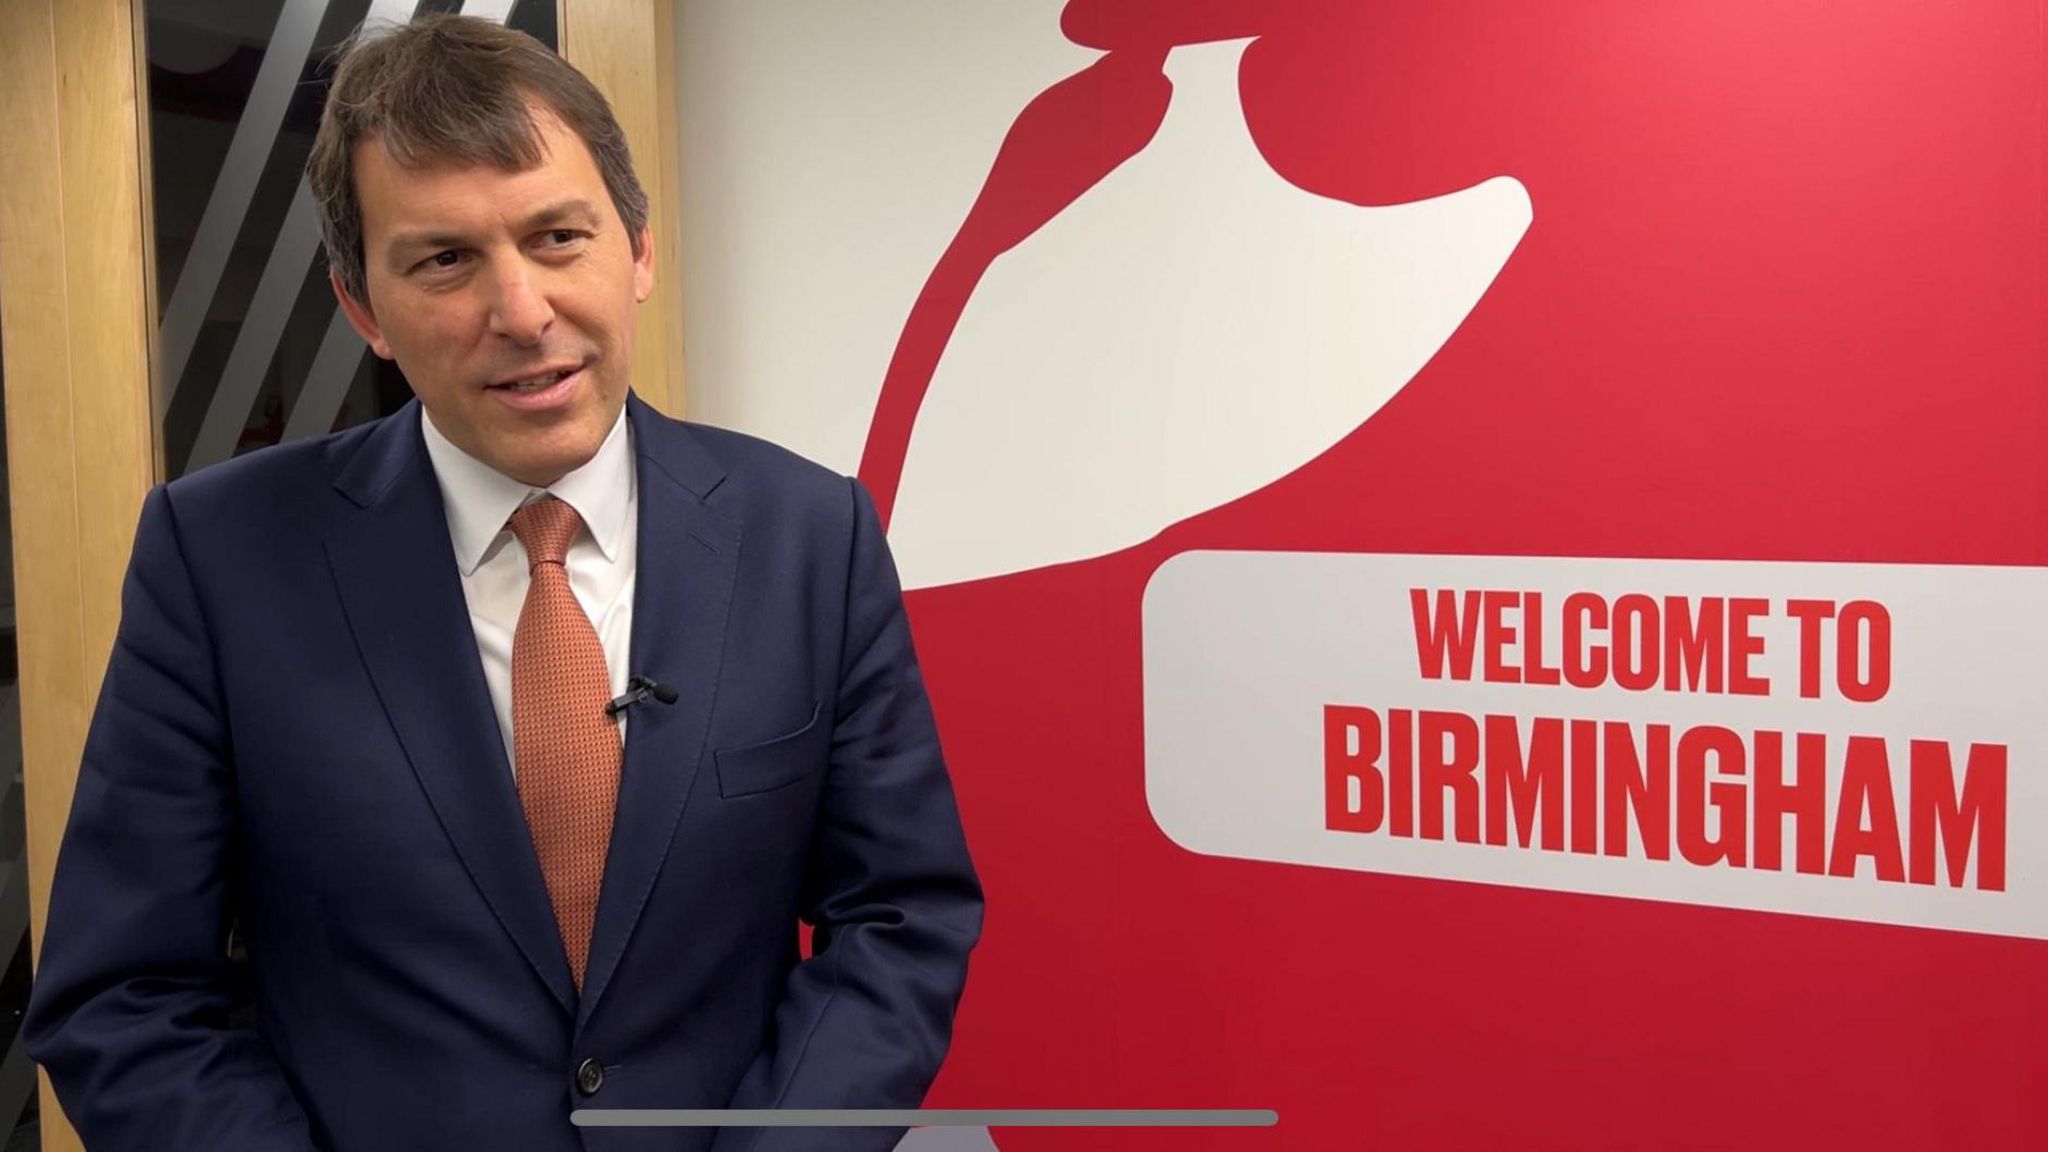 Cabinet Office Minister John Glen MP standing next to a "welcome to Birmingham" sign